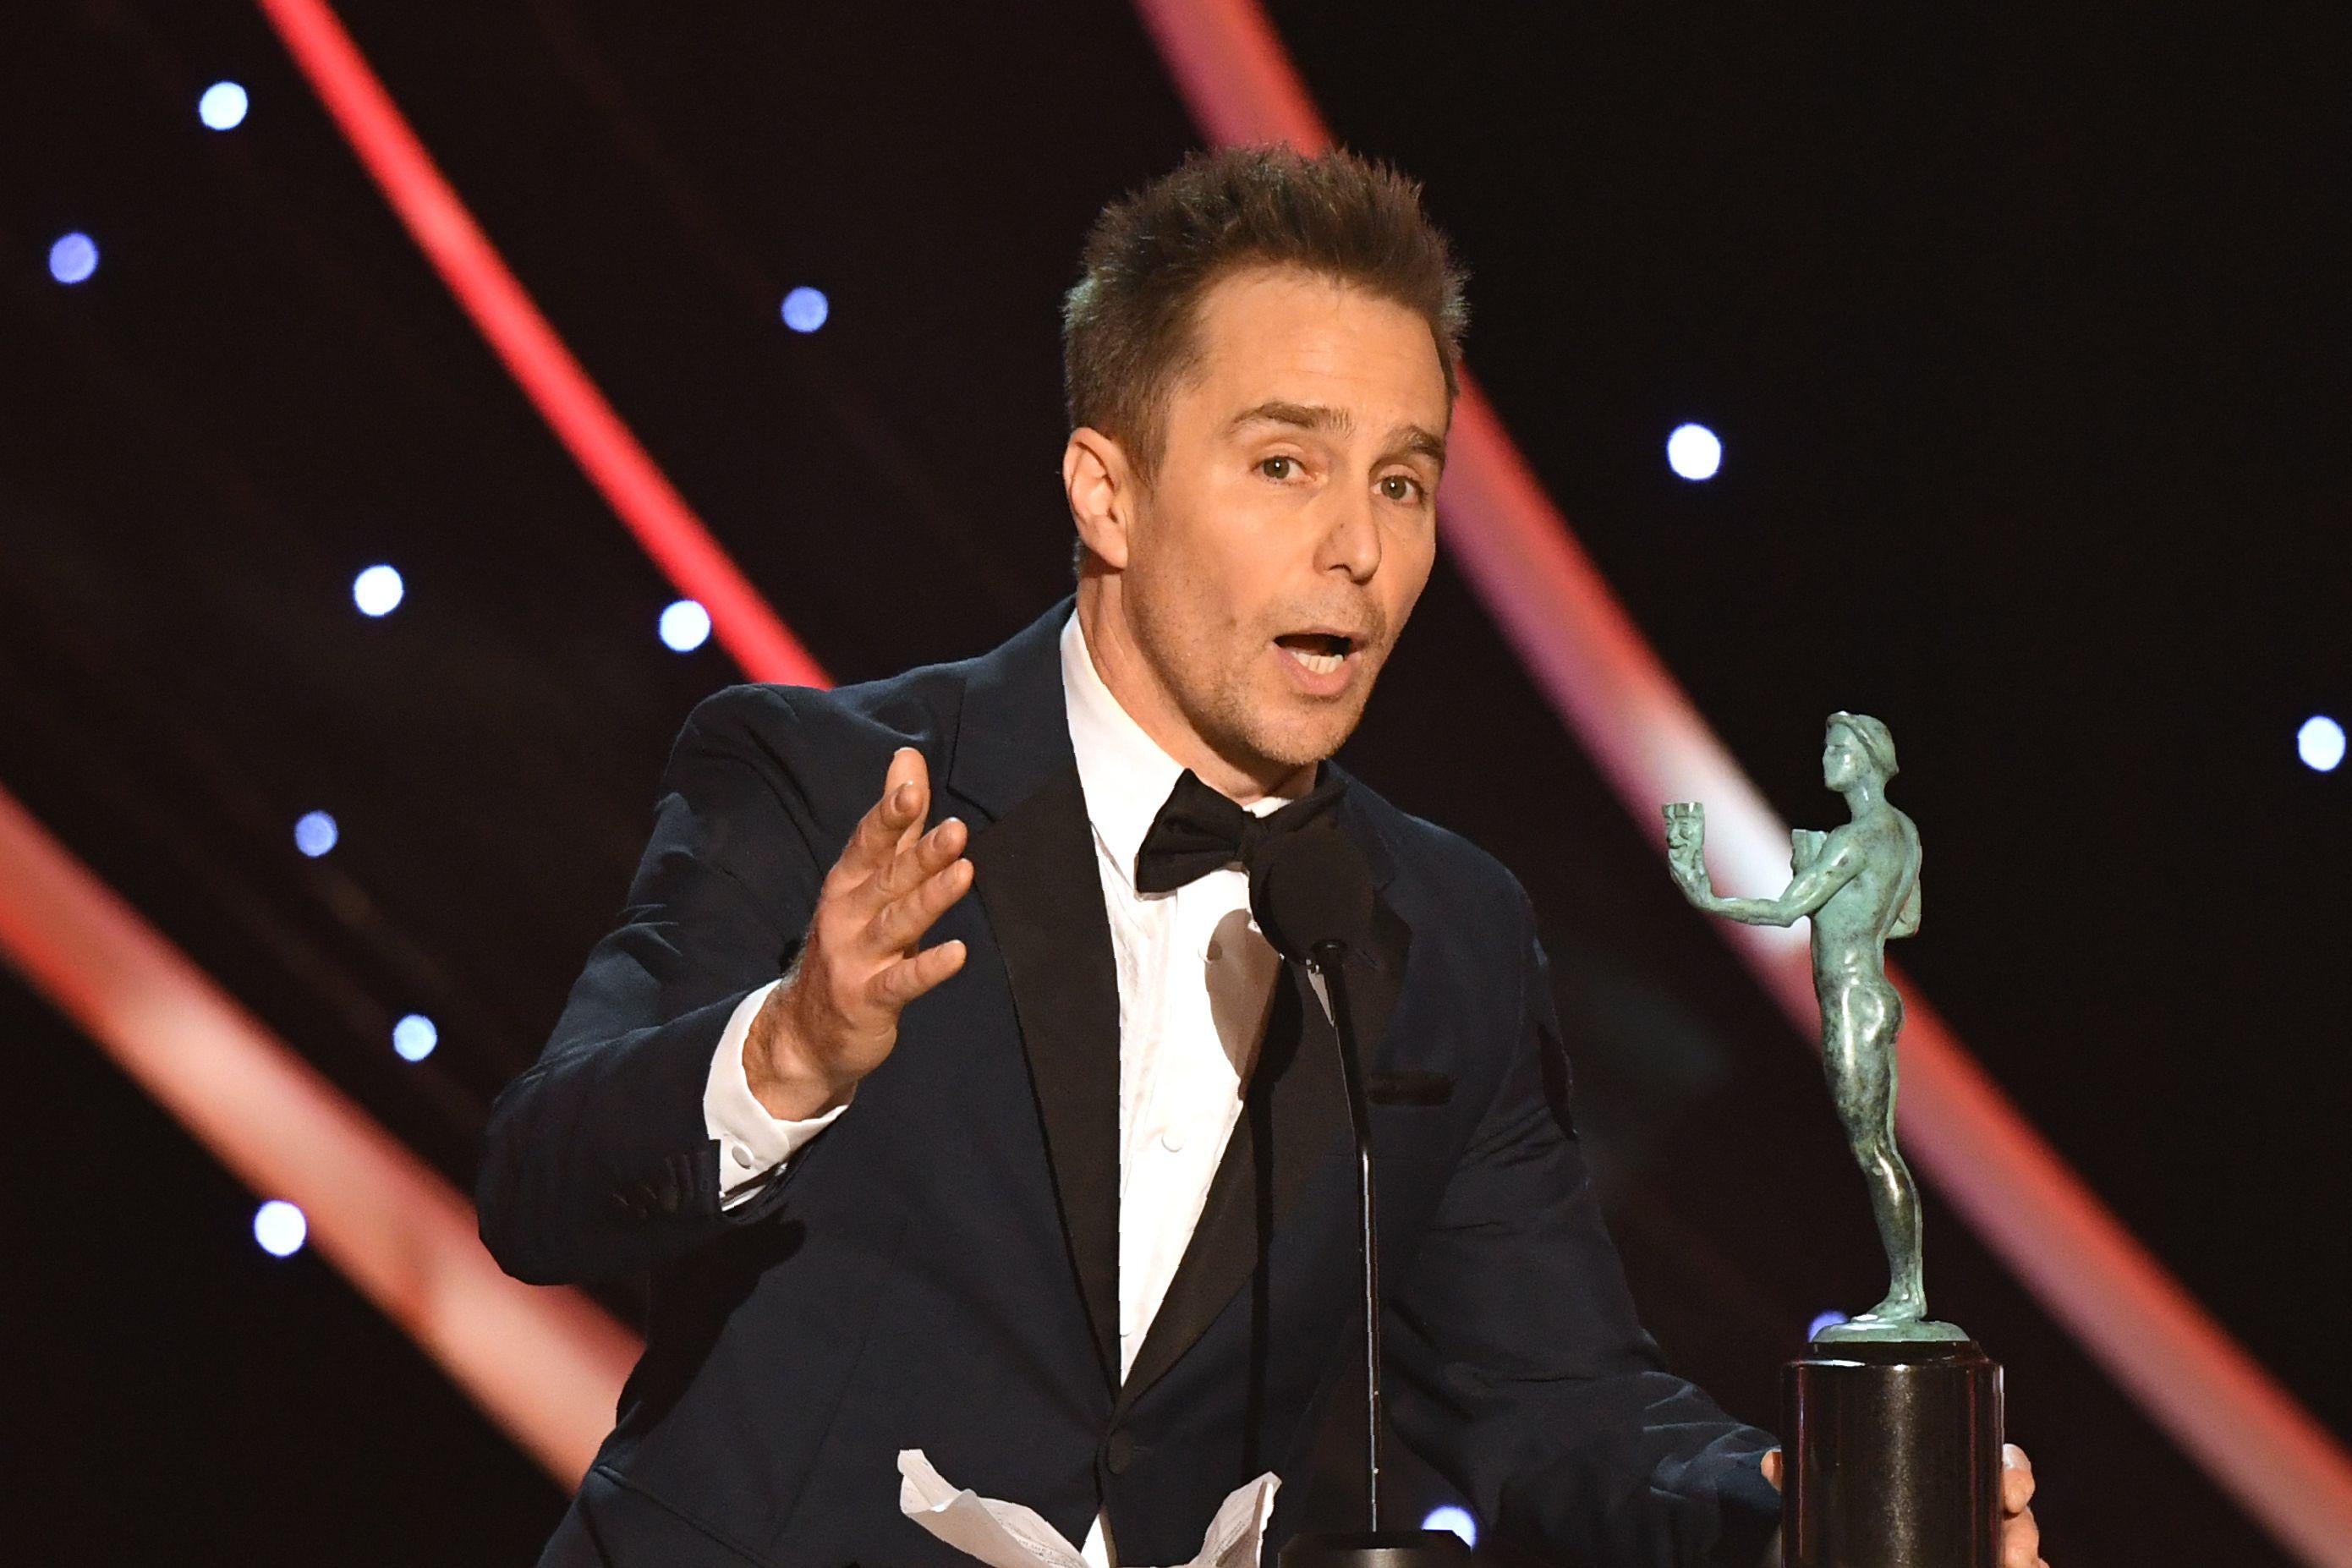 Sam Rockwell accepts the Outstanding Performance by a Male Actor in a Supporting Role award for 'Three Billboards Outside Ebbing, Missouri' onstage  during the 24th Annual Screen Actors Guild Awards show at The Shrine Auditorium on January 21, 2018 in Los Angeles, California. / AFP PHOTO / Mark RALSTON        (Photo credit should read MARK RALSTON/AFP/Getty Images)